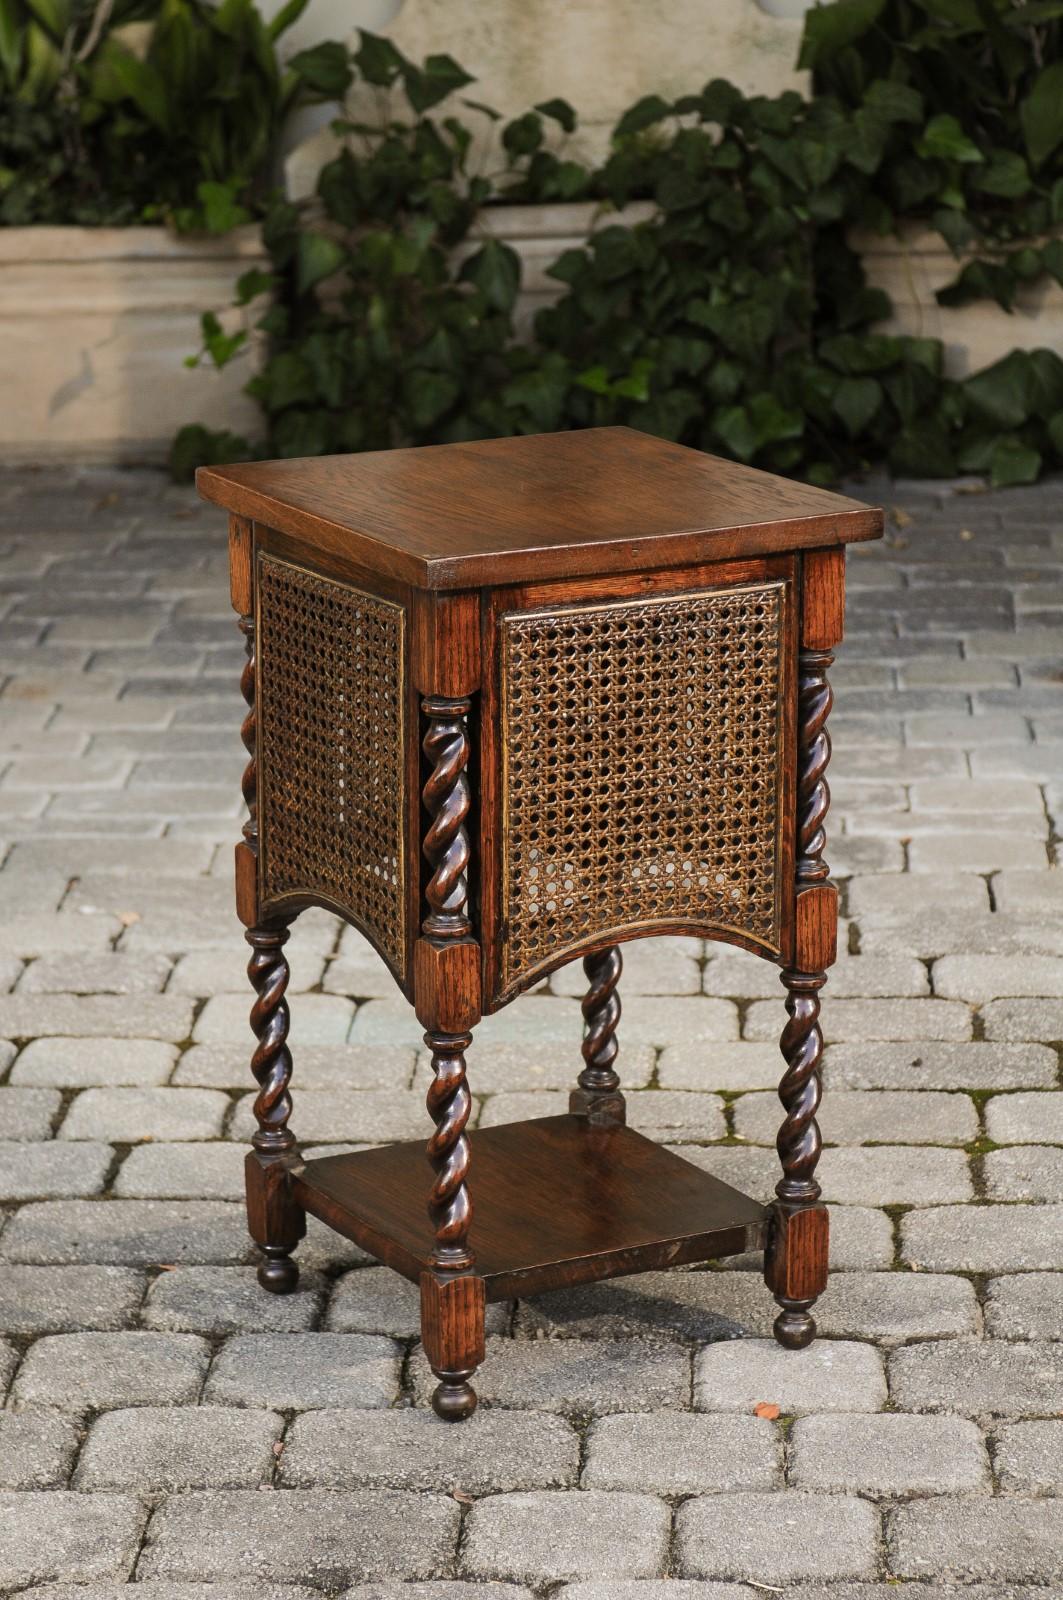 An English oak side table from the early 20th century, with barley twist accents and cane sides. Born in England at the turn of the century, this exquisite side table features a square top sitting above four cane panels arched in their bottom part